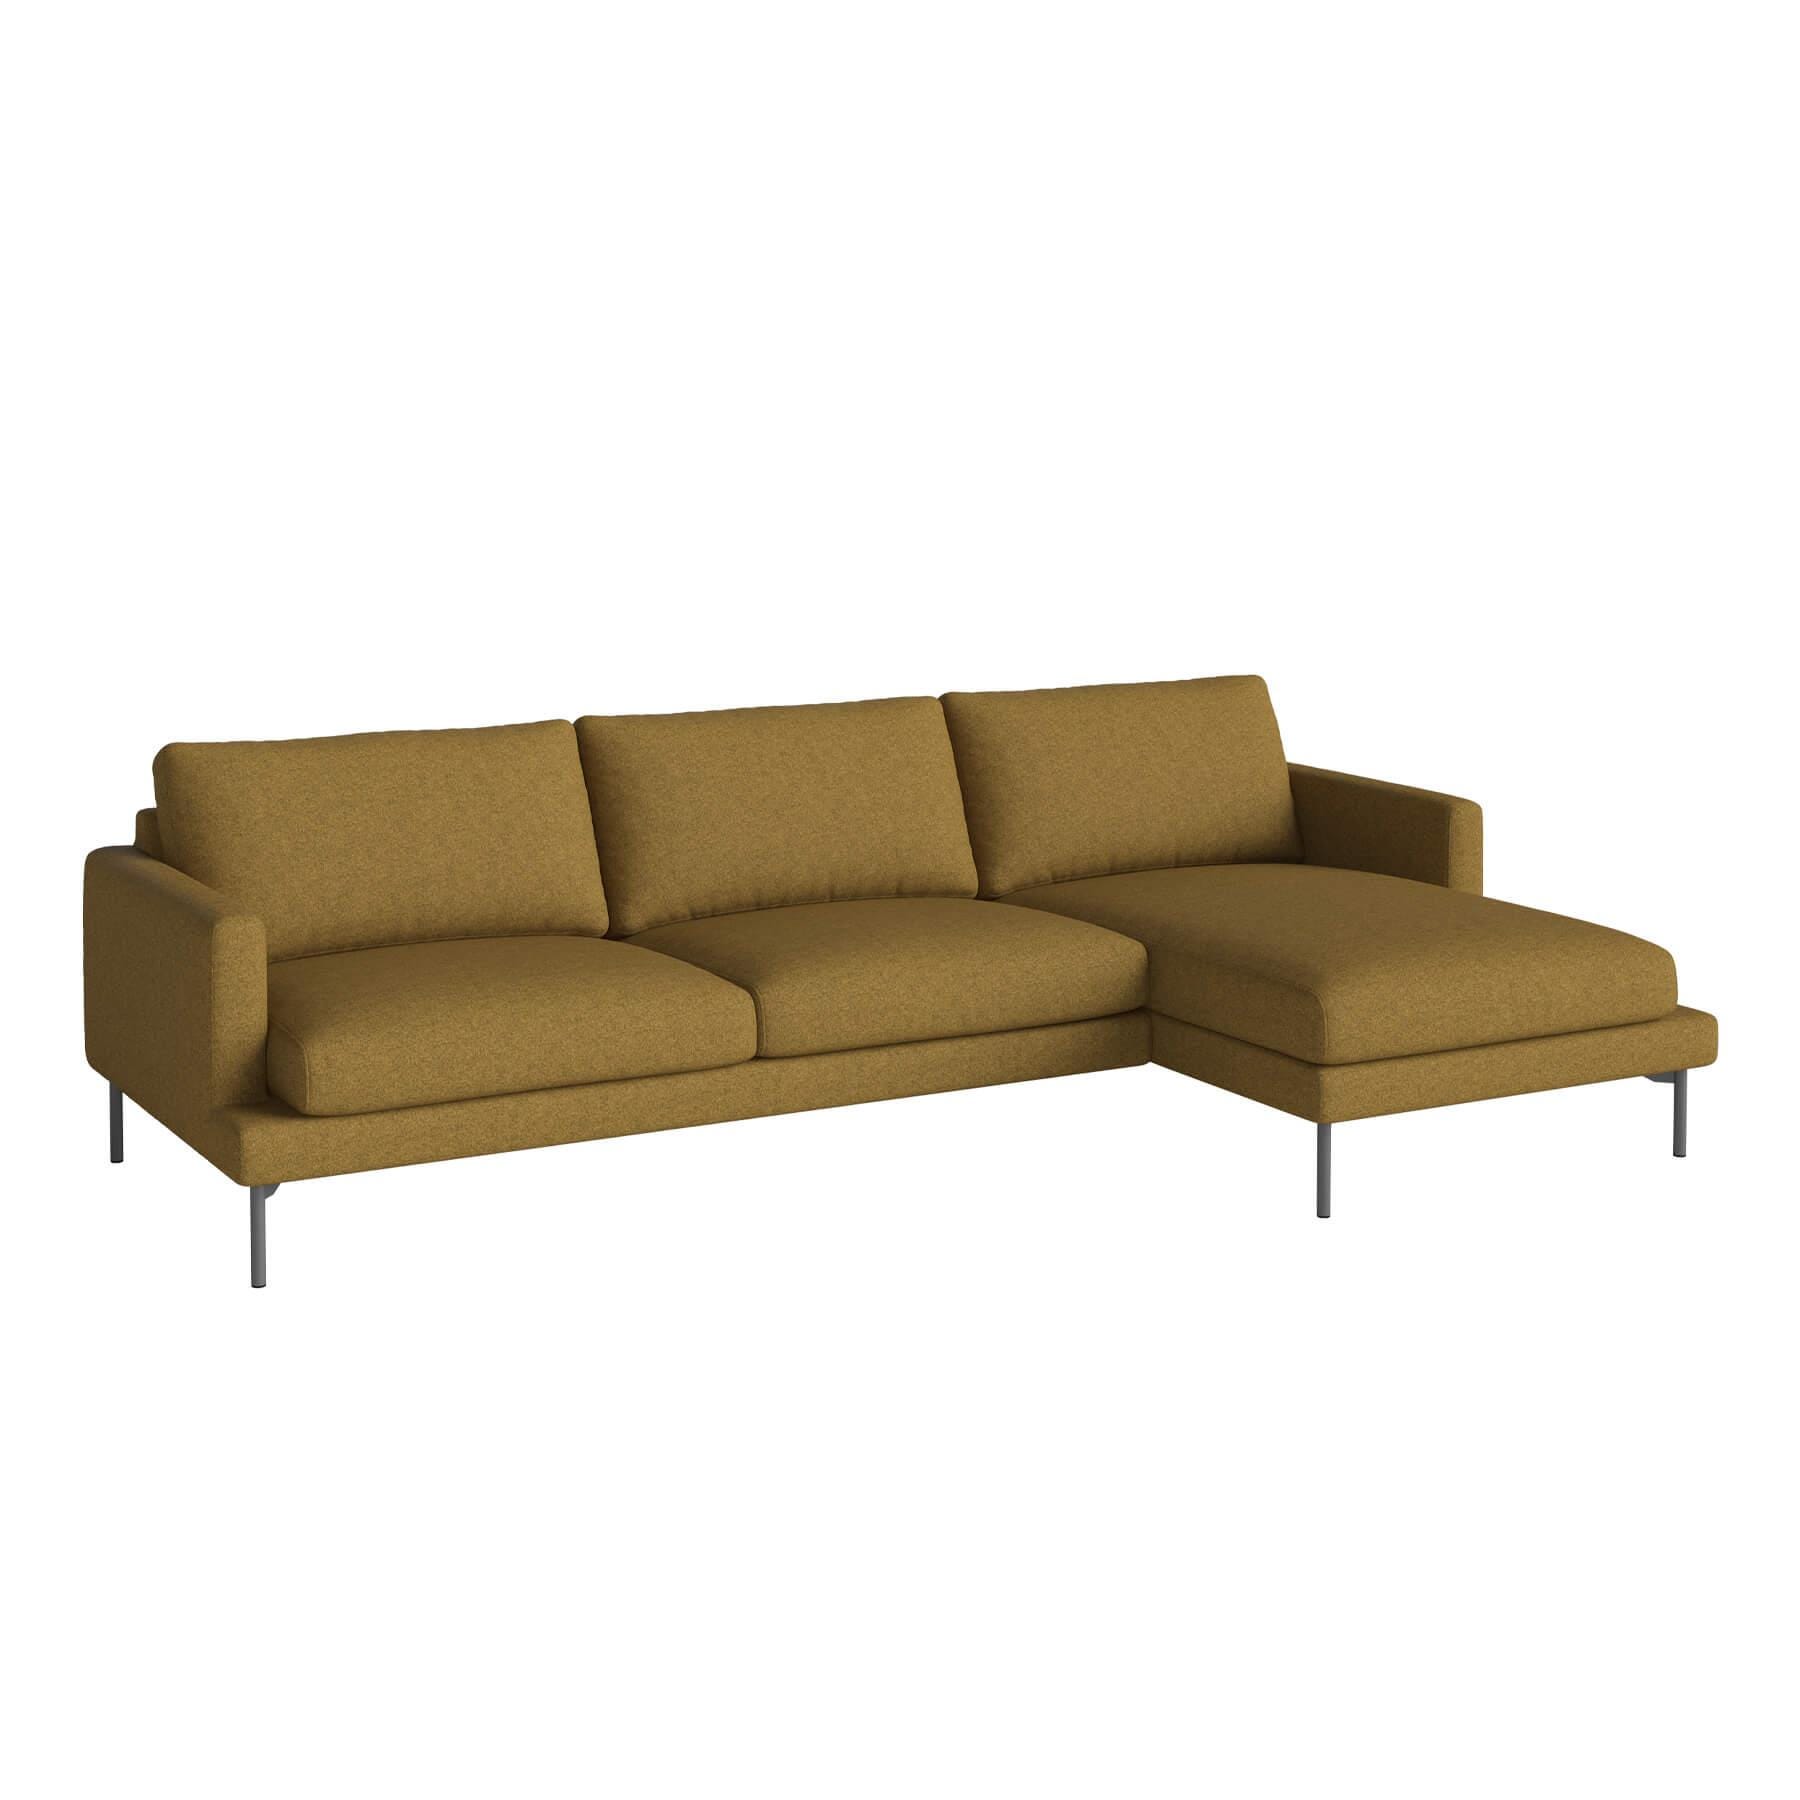 Bolia Veneda Sofa 35 Seater Sofa With Chaise Longue Grey Laquered Steel Qual Curry Right Brown Designer Furniture From Holloways Of Ludlow